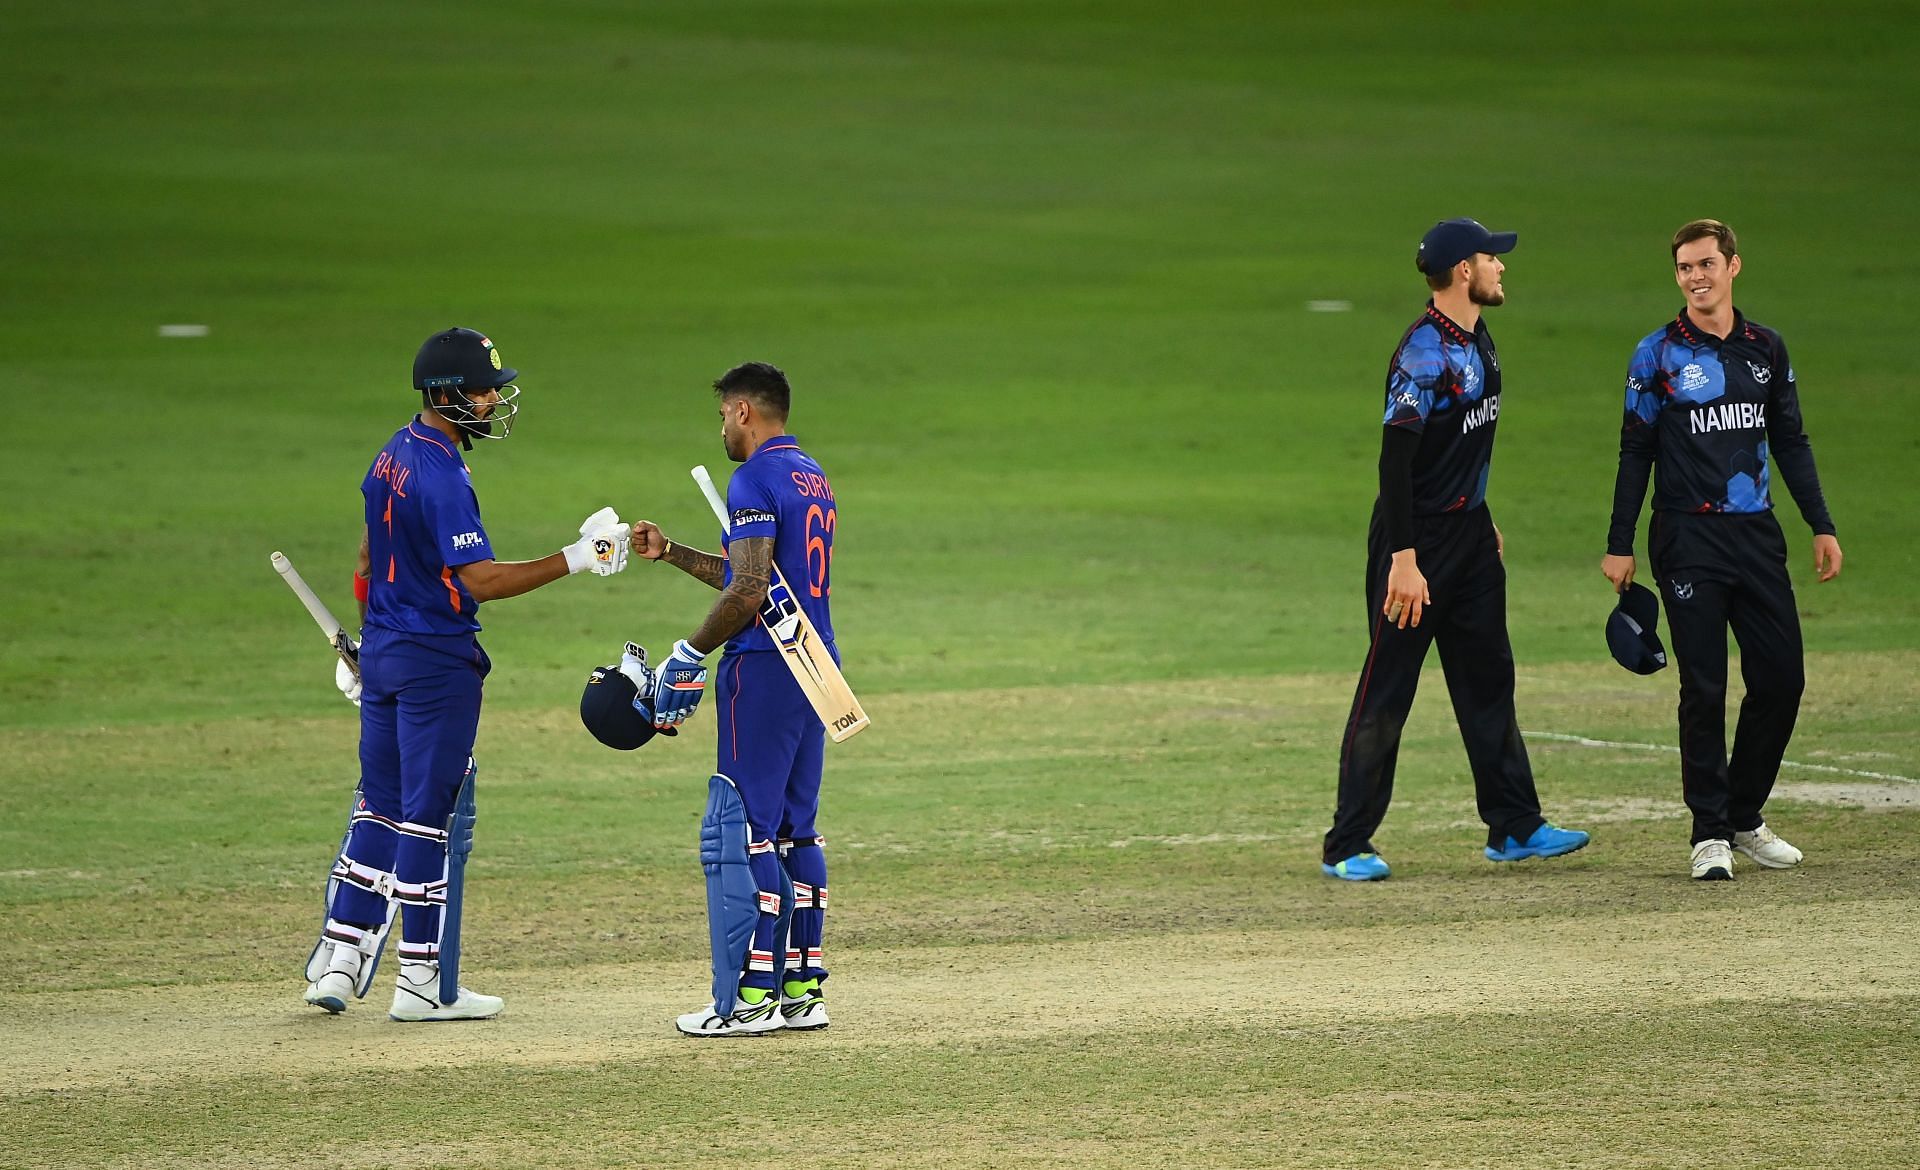 India defeated Namibia by 9 wickets in their final T20 World Cup 2021 league match